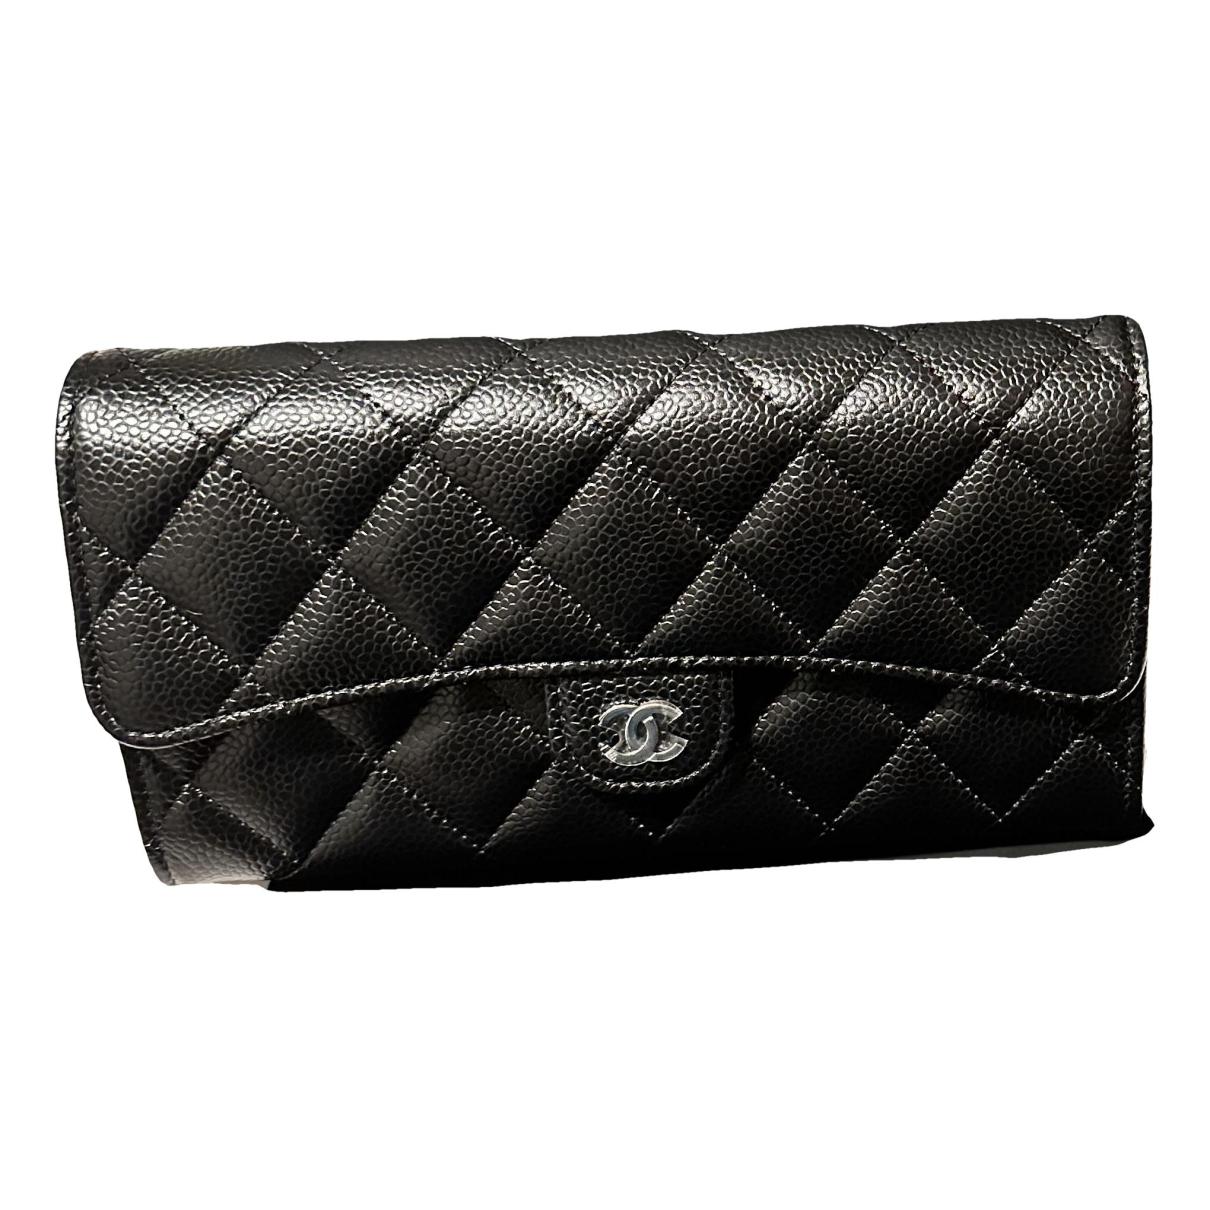 Timeless/classique leather wallet Chanel Black in Leather - 33006304